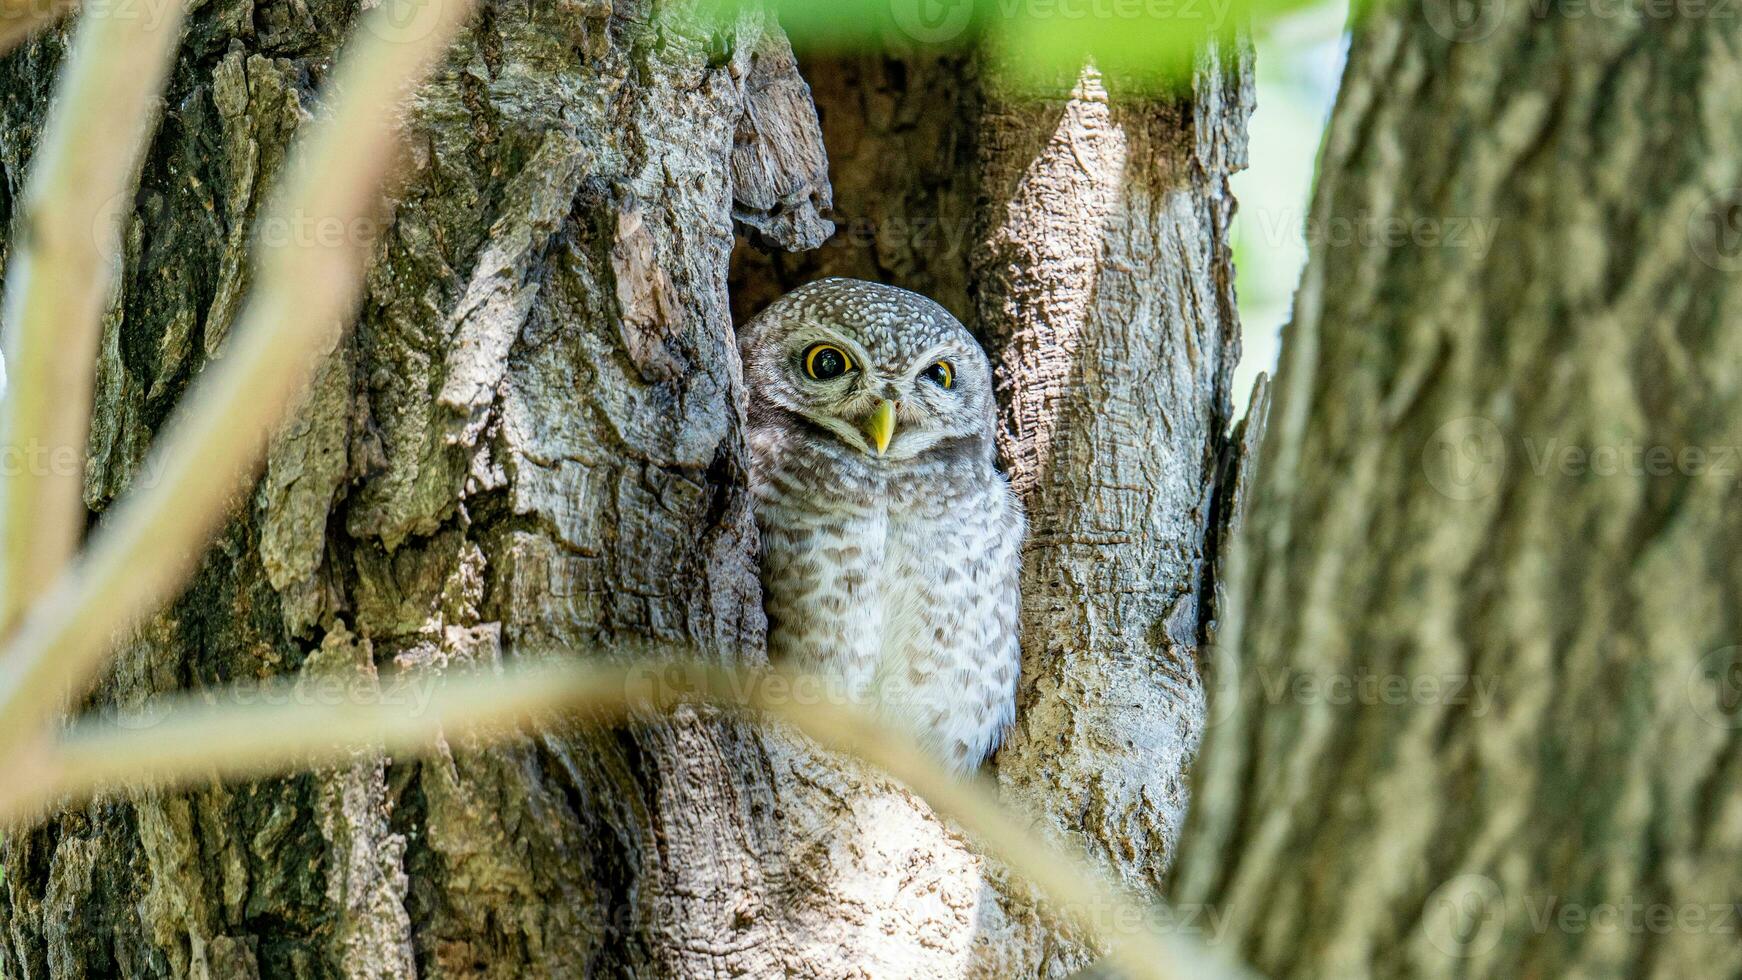 Spotted Owlet perched on tree photo